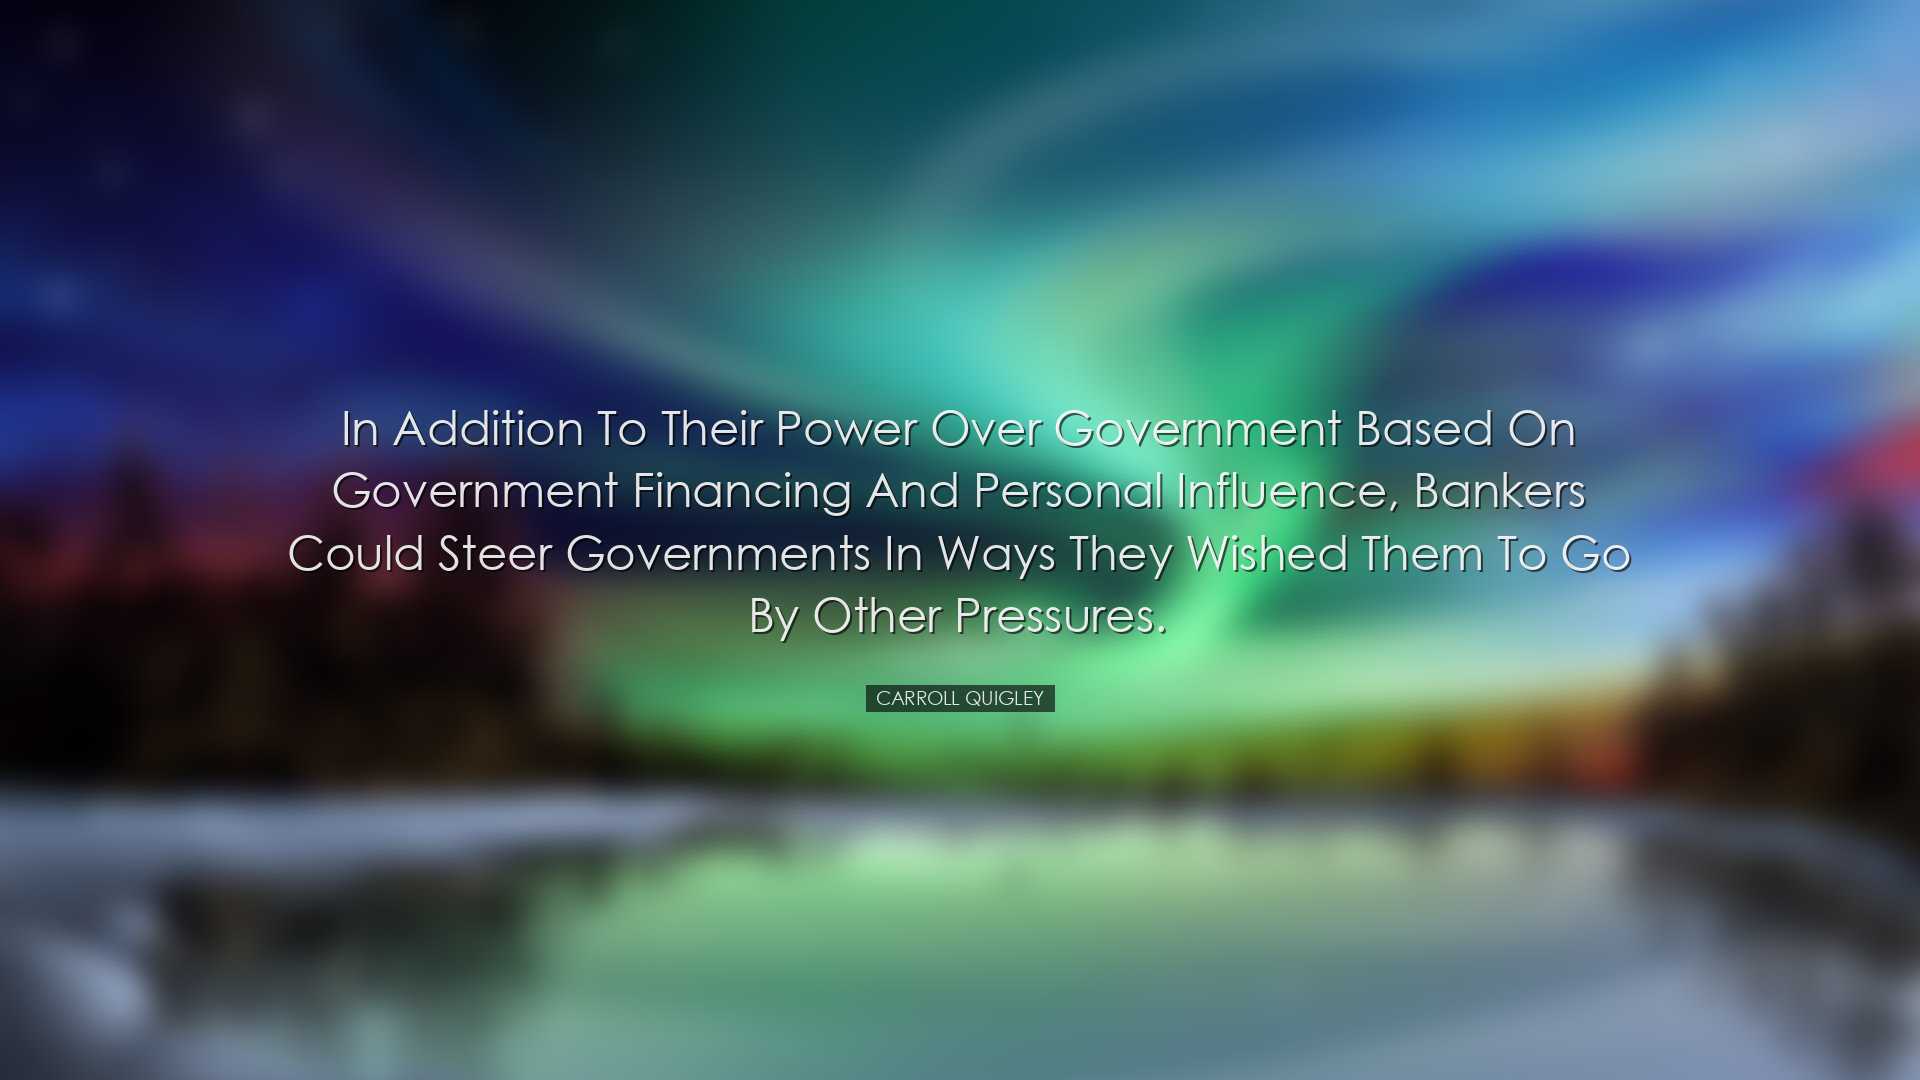 In addition to their power over government based on government fin